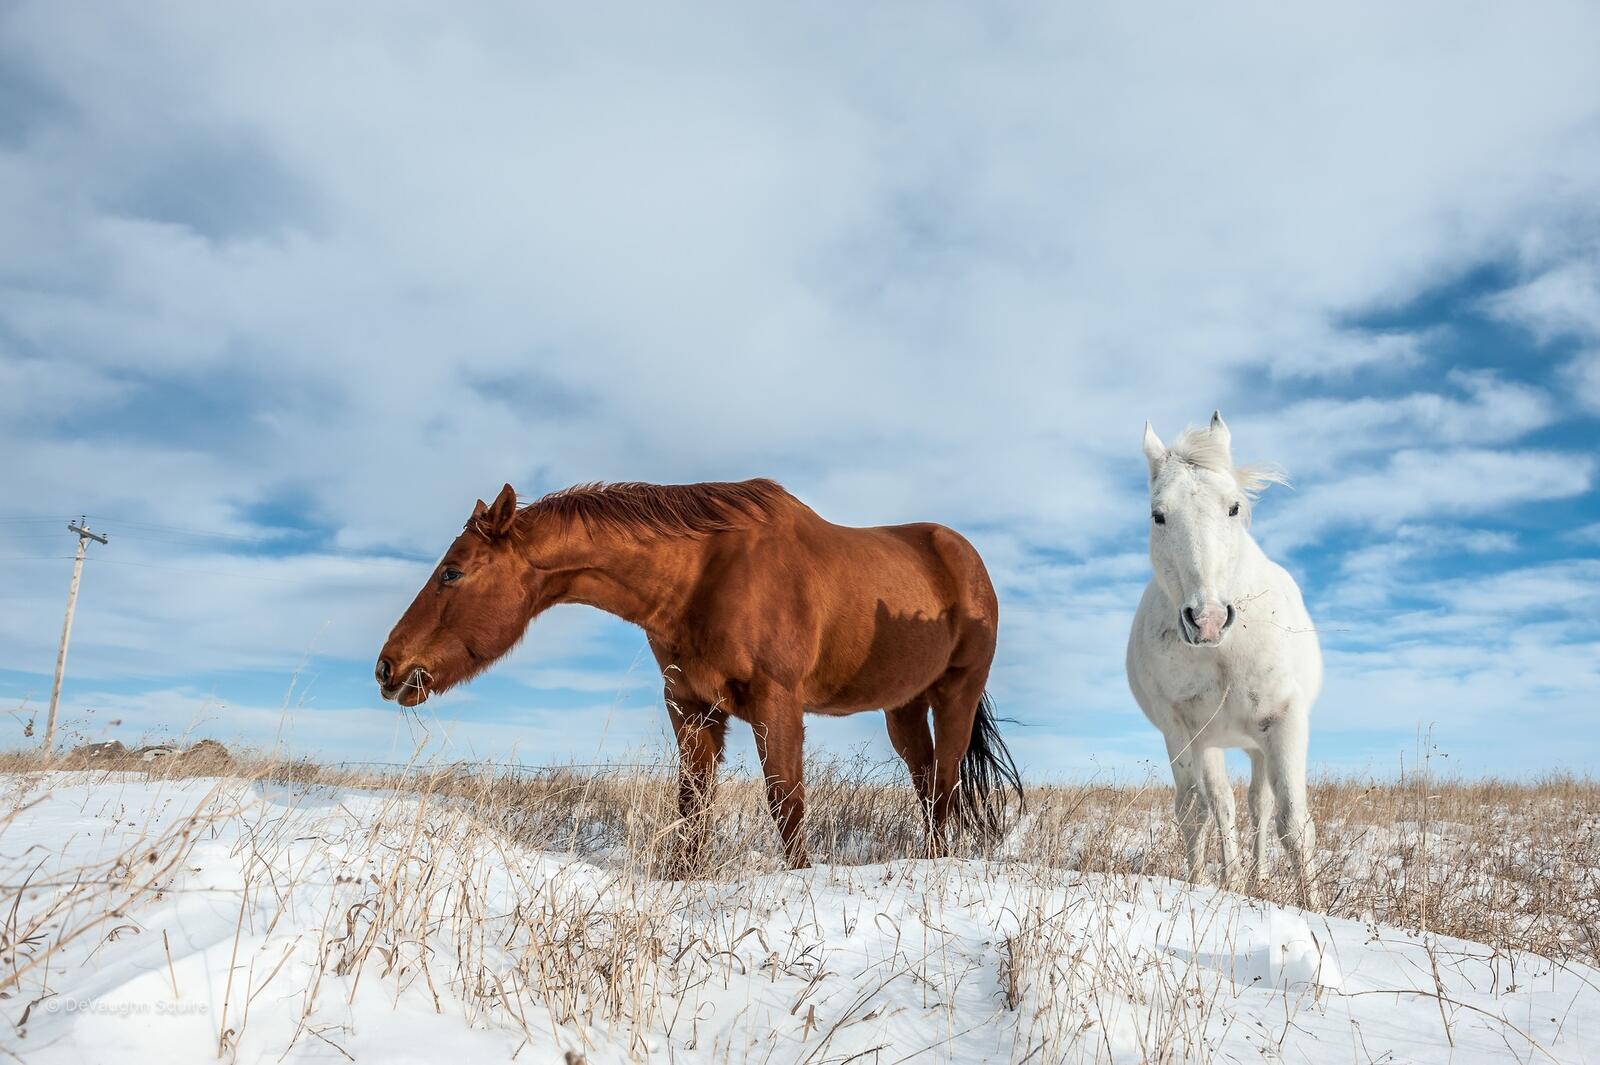 Free photo A white horse and a brown horse walk in a snowy field